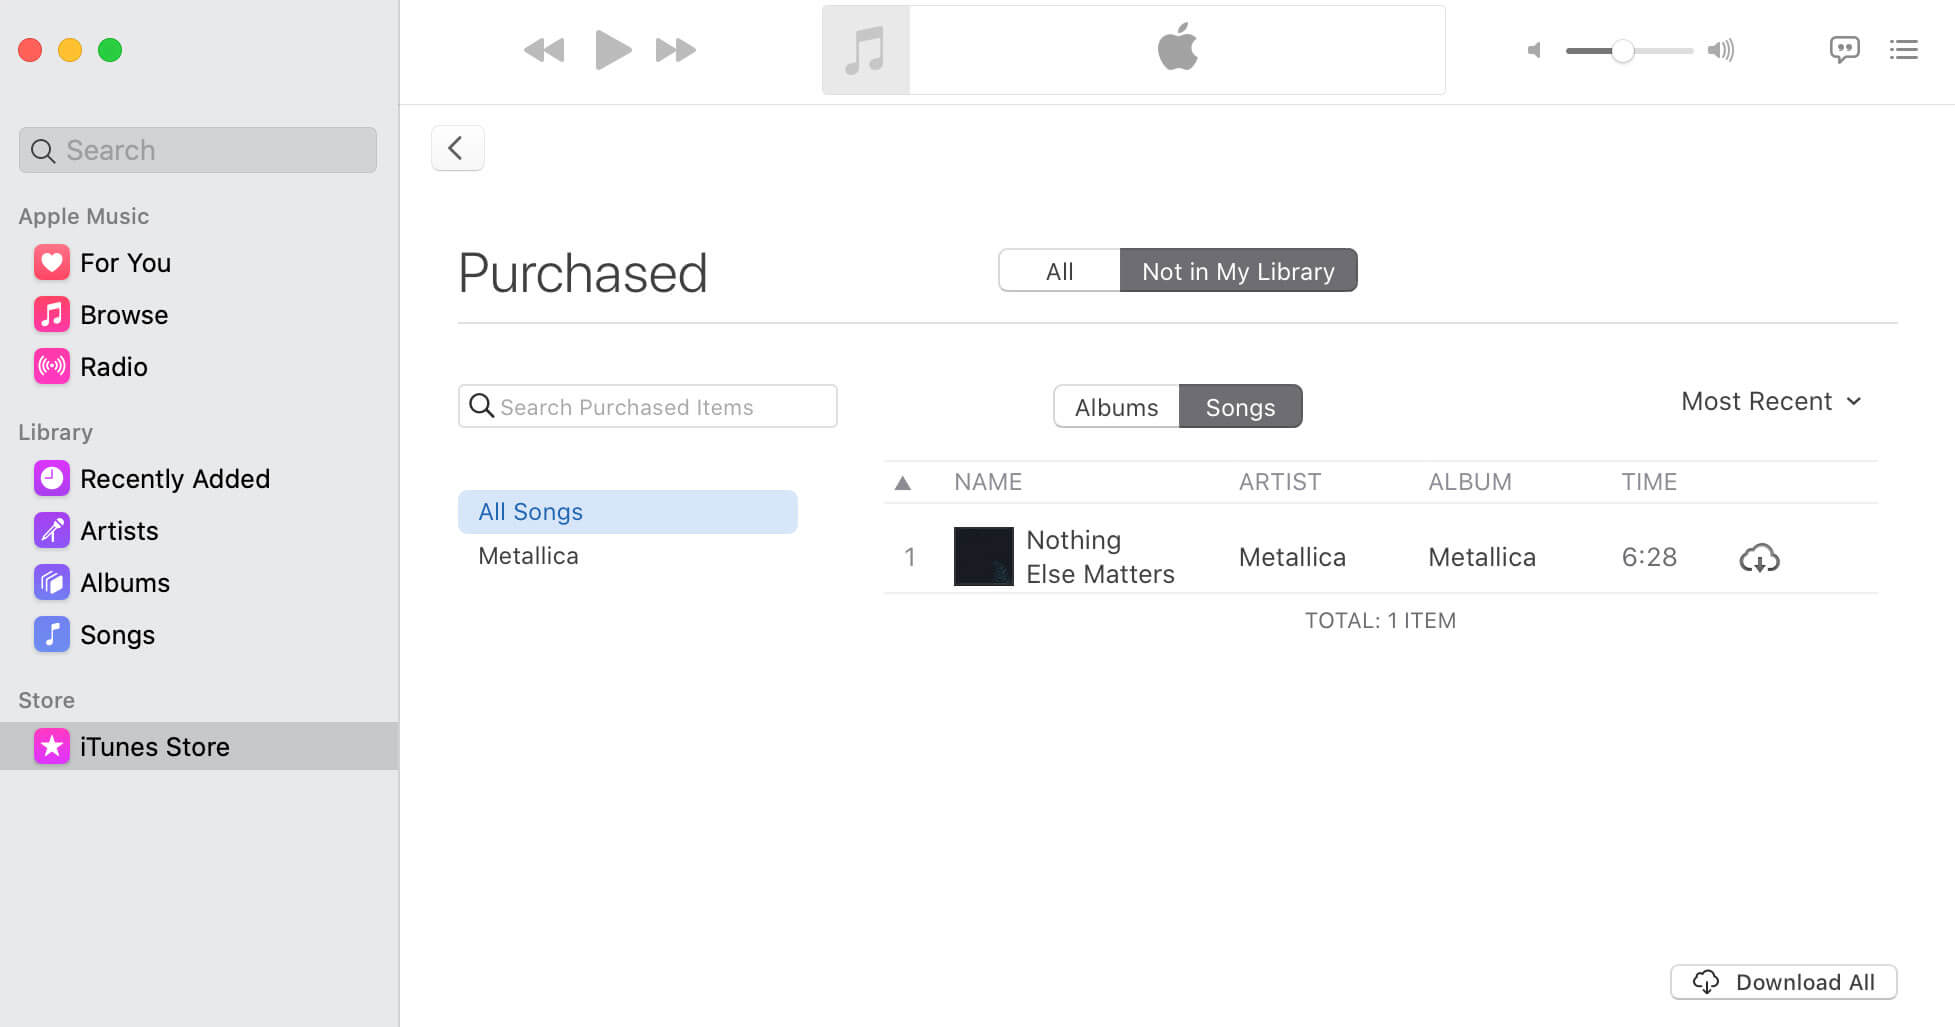 How to recover deleted music from iTunes